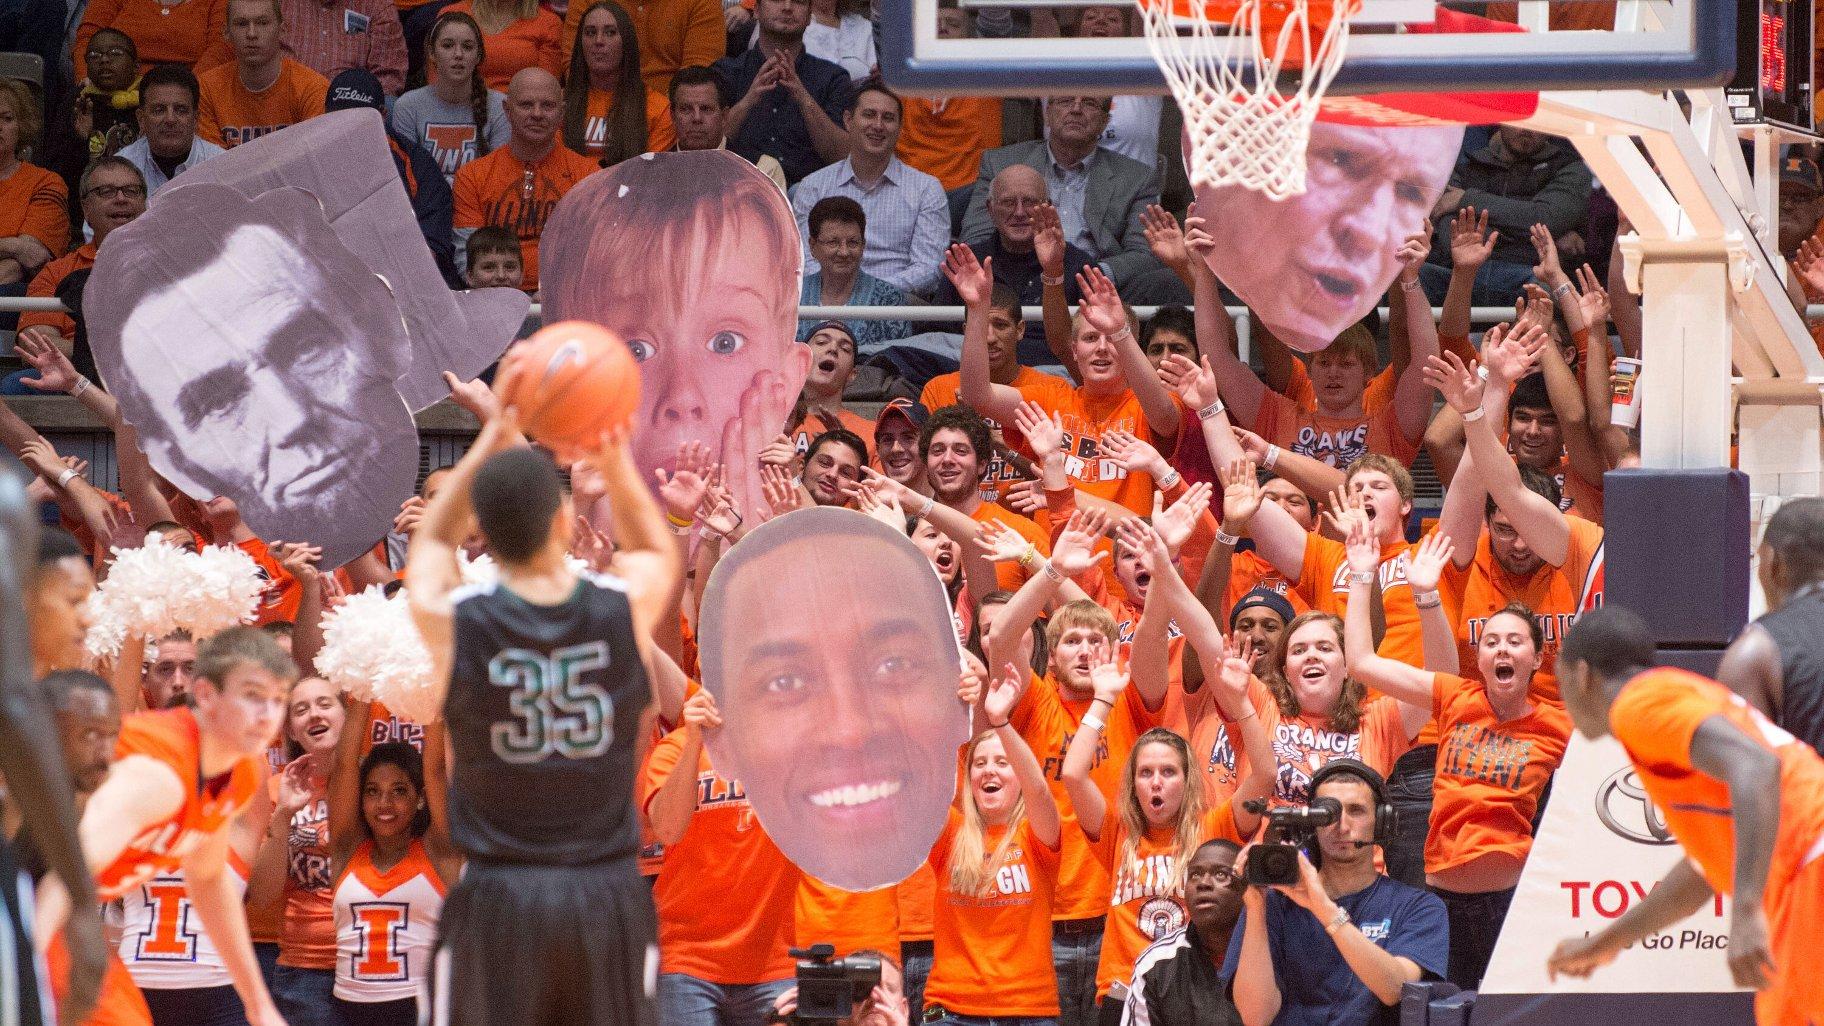 The Illinois Orange Krush student section uses large heads to heckle Chicago State's Clarke Rosenberg (35) as he tries for a foul shot during the second half of an NCAA college basketball game on Nov. 22, 2013, in Champaign, Ill. (AP Photo / Darrell Hoemann, File)